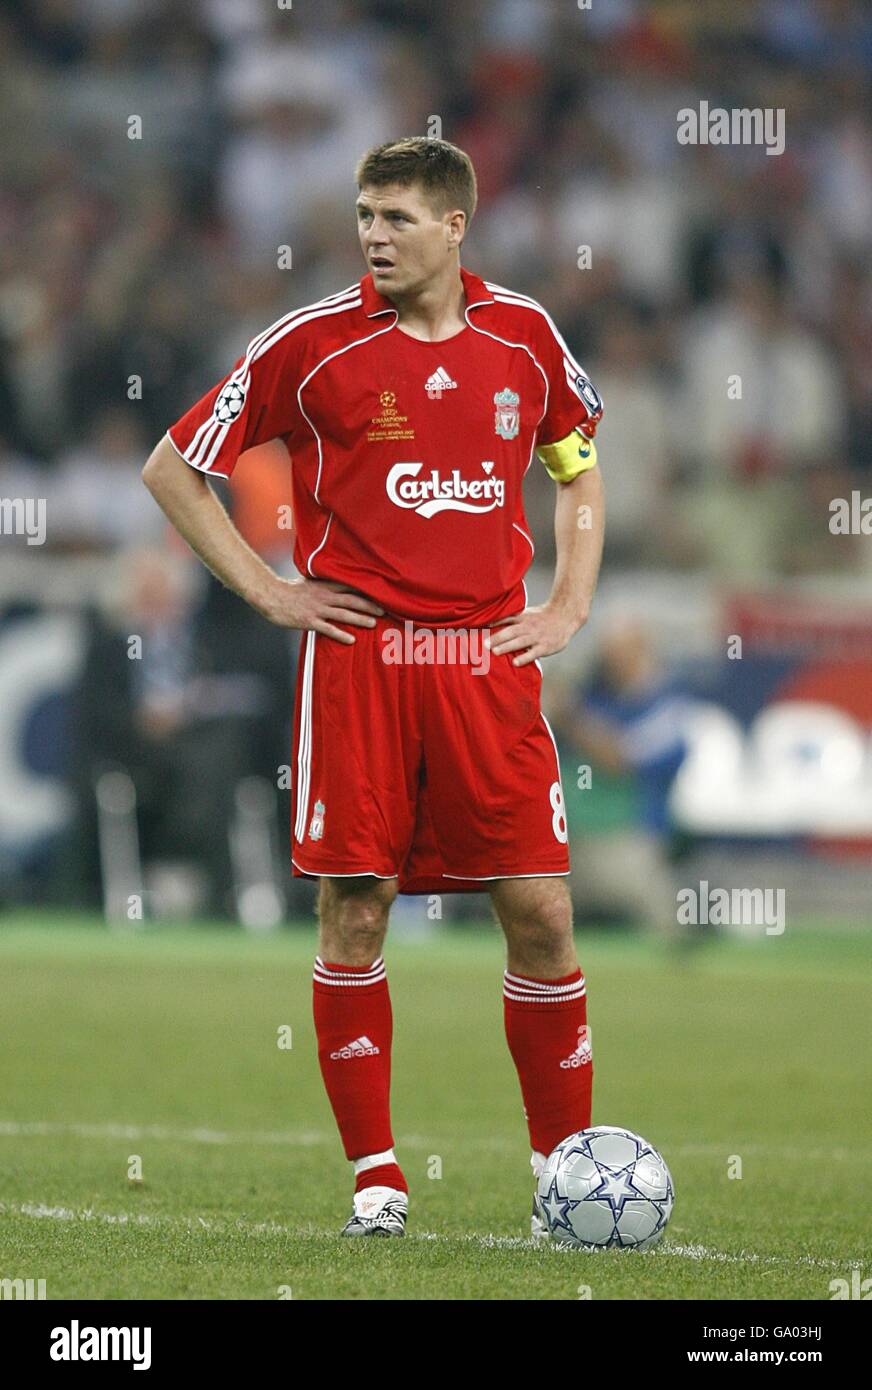 Soccer - UEFA Champions League - Final - AC Milan v Liverpool - Olympic Stadium. Liverpool's Steven Gerrard stands dejected after AC Milan's Filippo Inzaghi scores the first goal Stock Photo